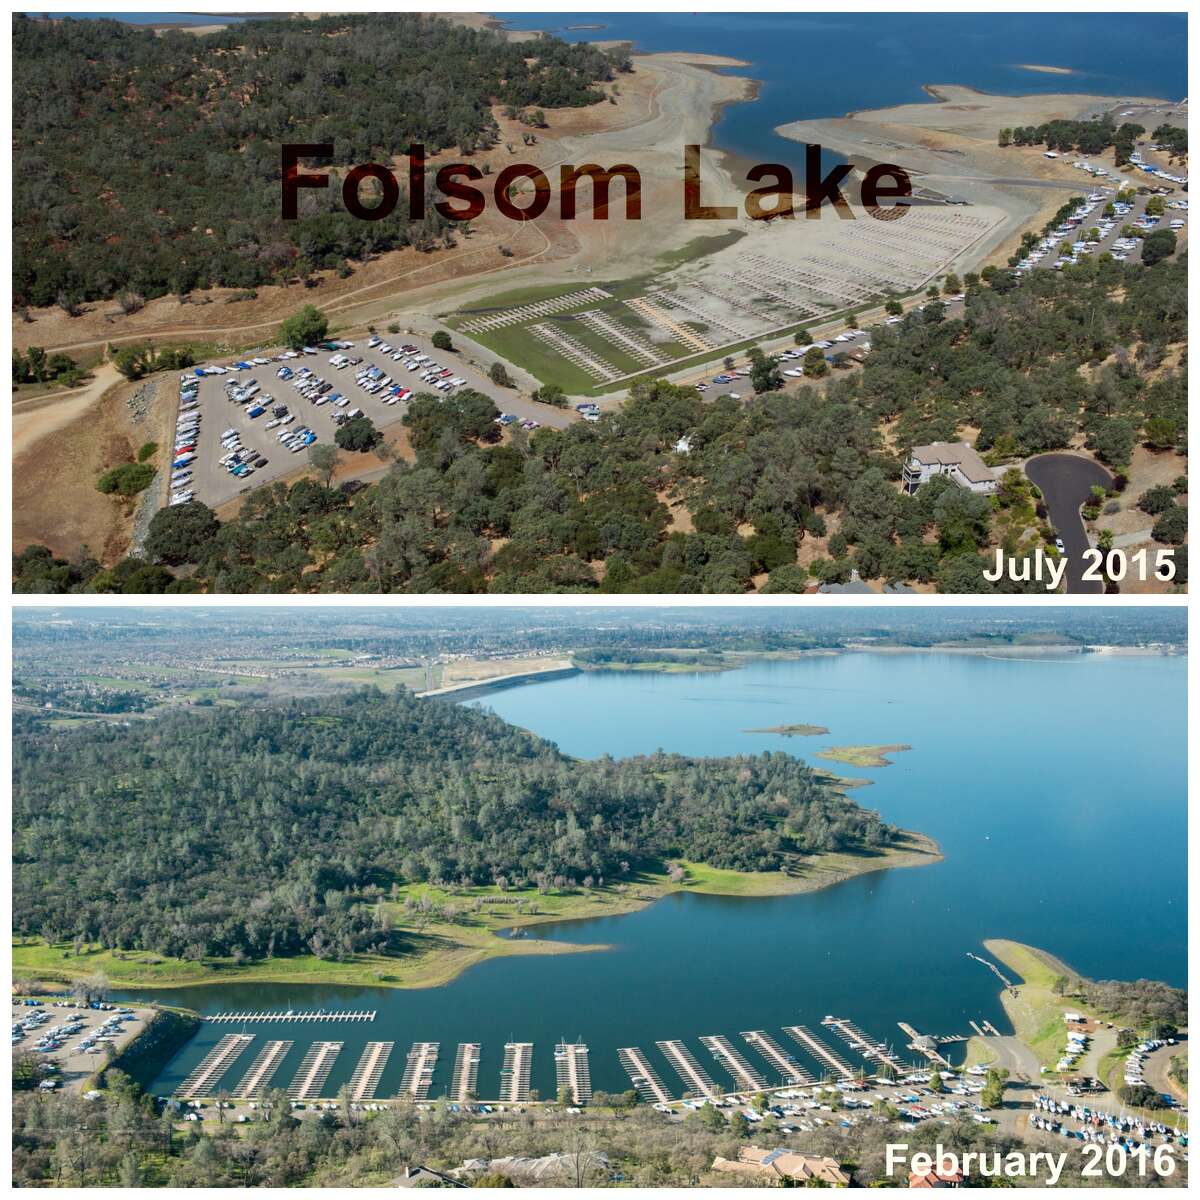 Folsom Lake Top: Aerial view of Folsom Lake Marina (a.k.a. Browns Ravine Marina), showing low water level (drought conditions). One of the largest inland marinas in California, it is located in Browns Ravine at Folsom Lake State Recreational Area. The Marina is located at the south end of the lake and has an earth filled break wall protecting it from the main lake. (Paul Hames) Bottom: A southwest view of Folsom Lake Marina and Browns Ravine Cove in El Dorado Hills, Calif. February 25, 2016. On this day, the water storage was 616,340 acre feet, 63% of total capacity, and 114% of historical average for this date. Folsom Lake is a reservoir in Northern California about 25 mi (40 km) northeast of Sacramento in Placer, El Dorado, and Sacramento Counties. (Florence Low)